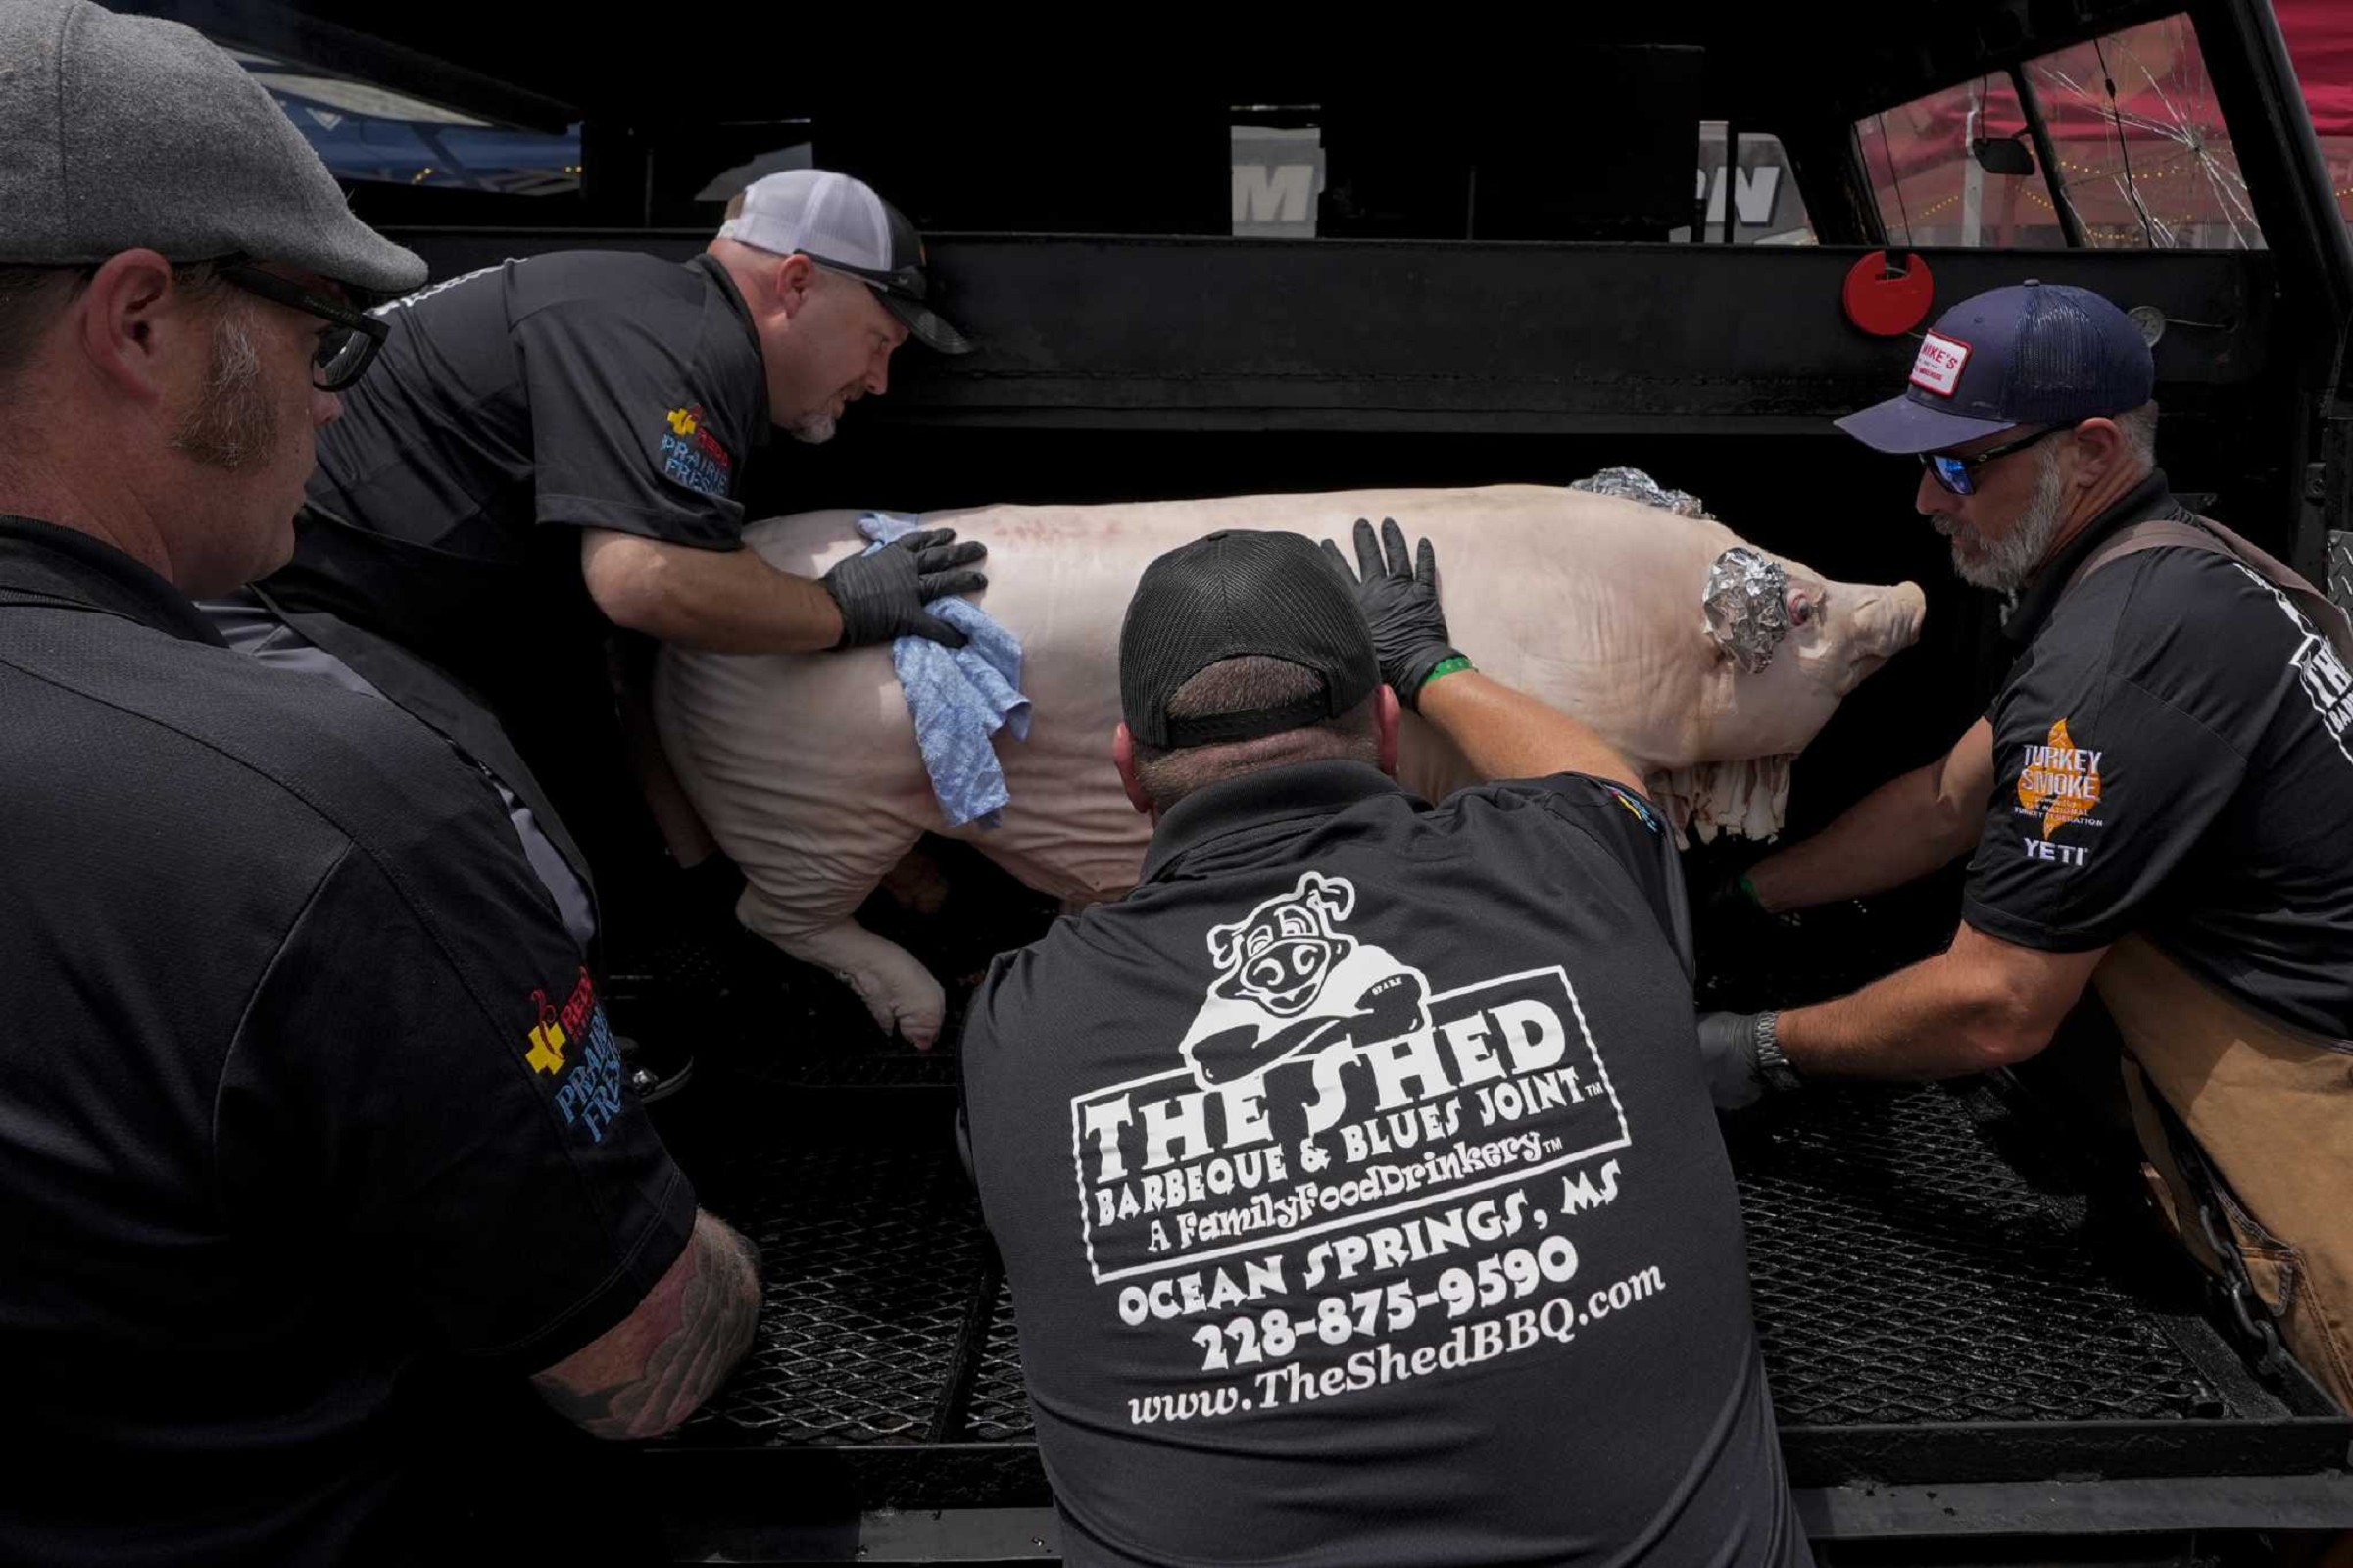 At Memphis BBQ contest, pitmasters sweat through the smoke to be best in pork